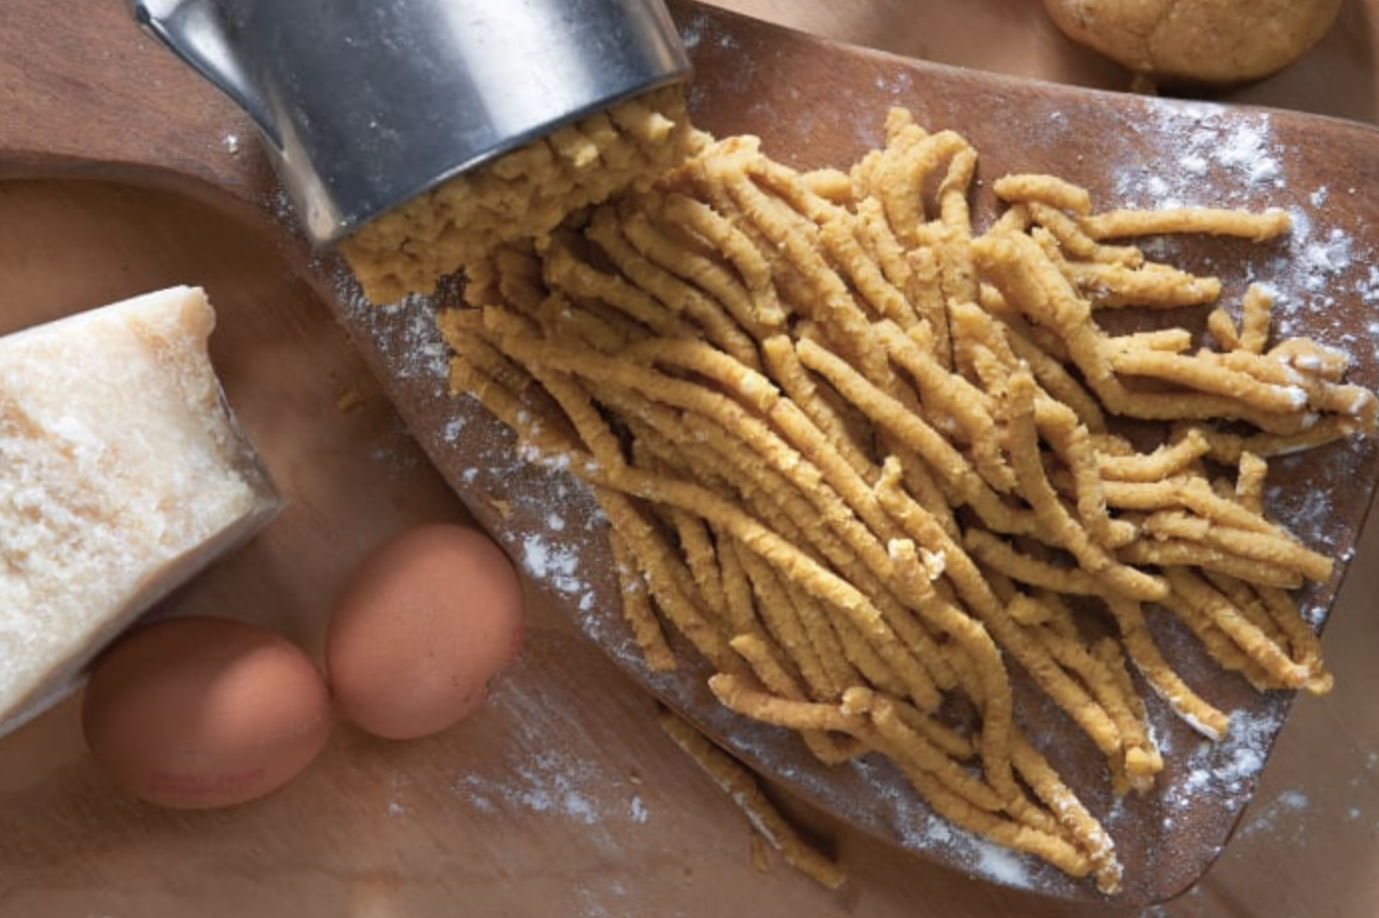 Passatelli is not made with flour